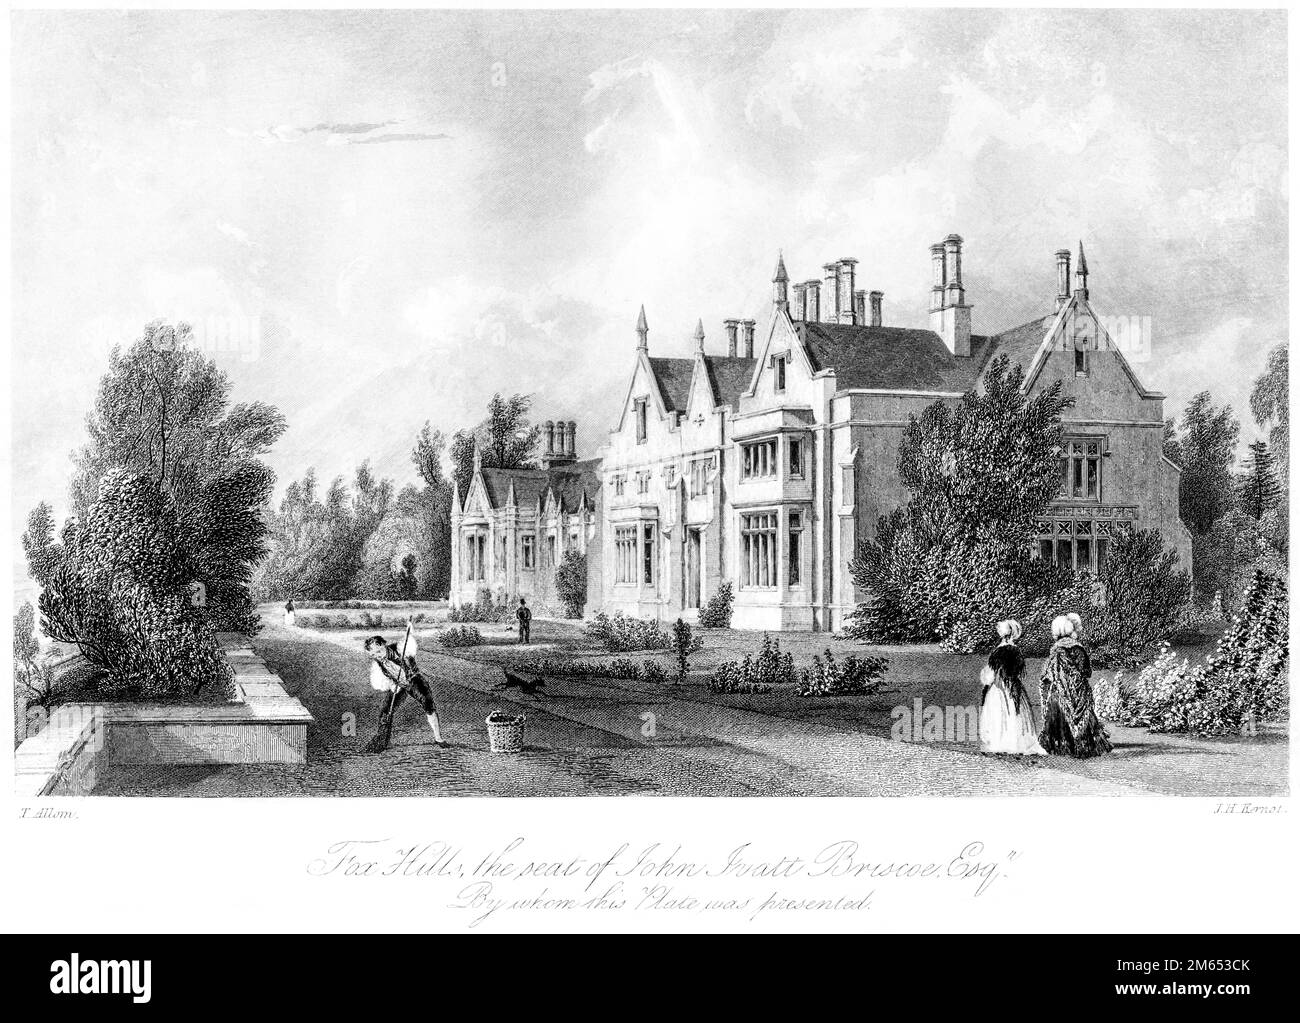 An engraving of Fox Hills, the Seat of John Ivatt Briscoe Esq., Surrey UK scanned at high resolution from a book printed in 1850. Stock Photo